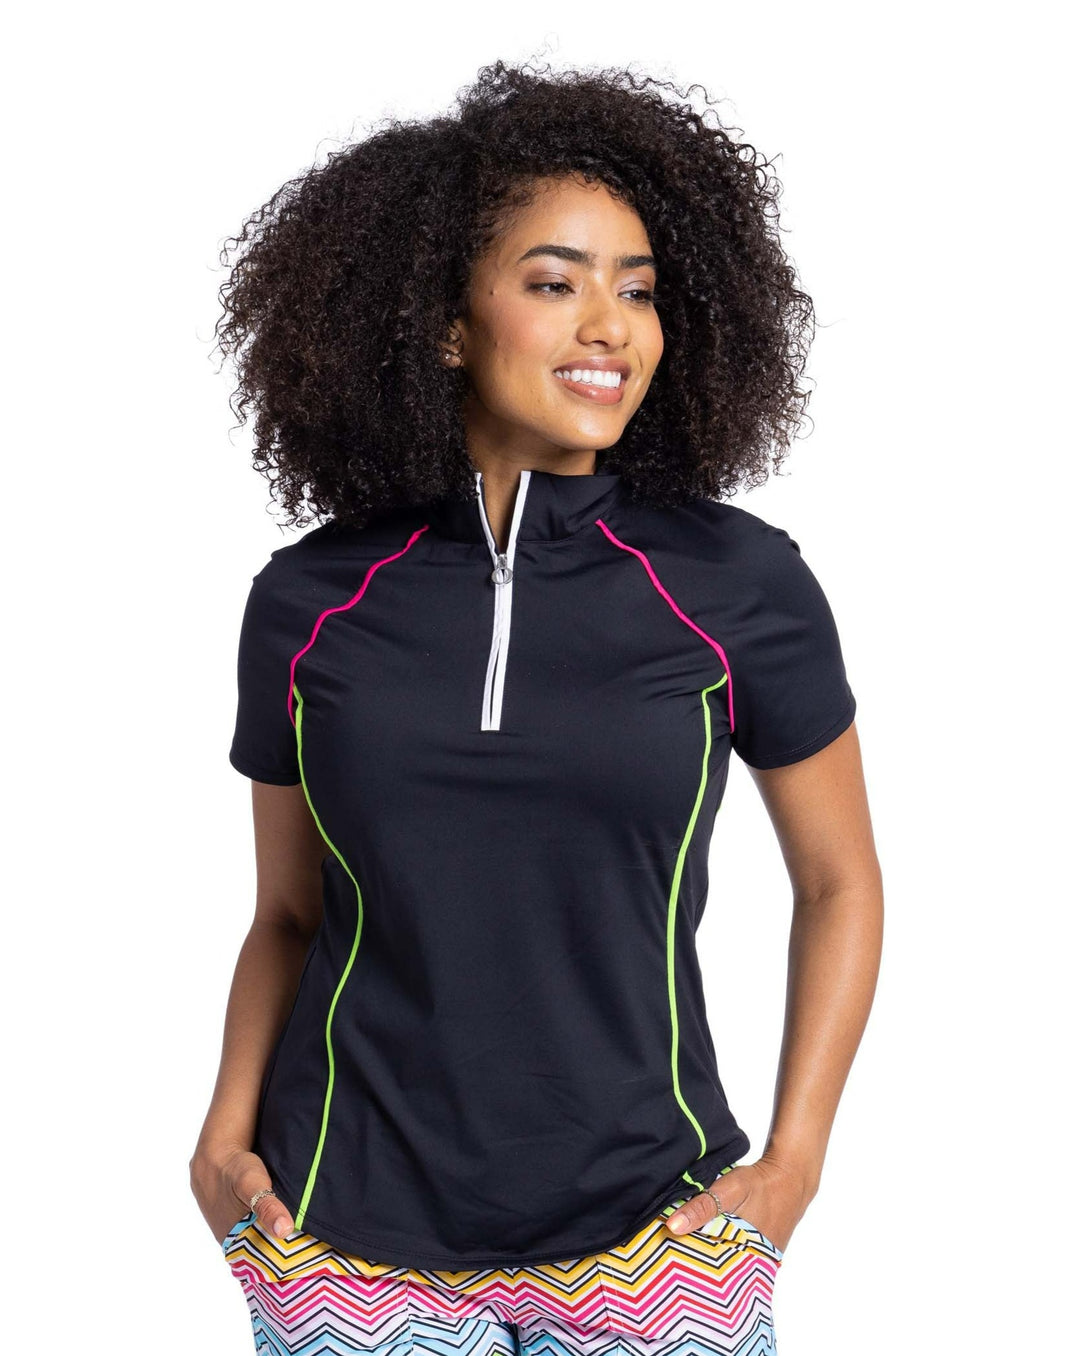 Woman's black golf shirt with pink and yellow piping